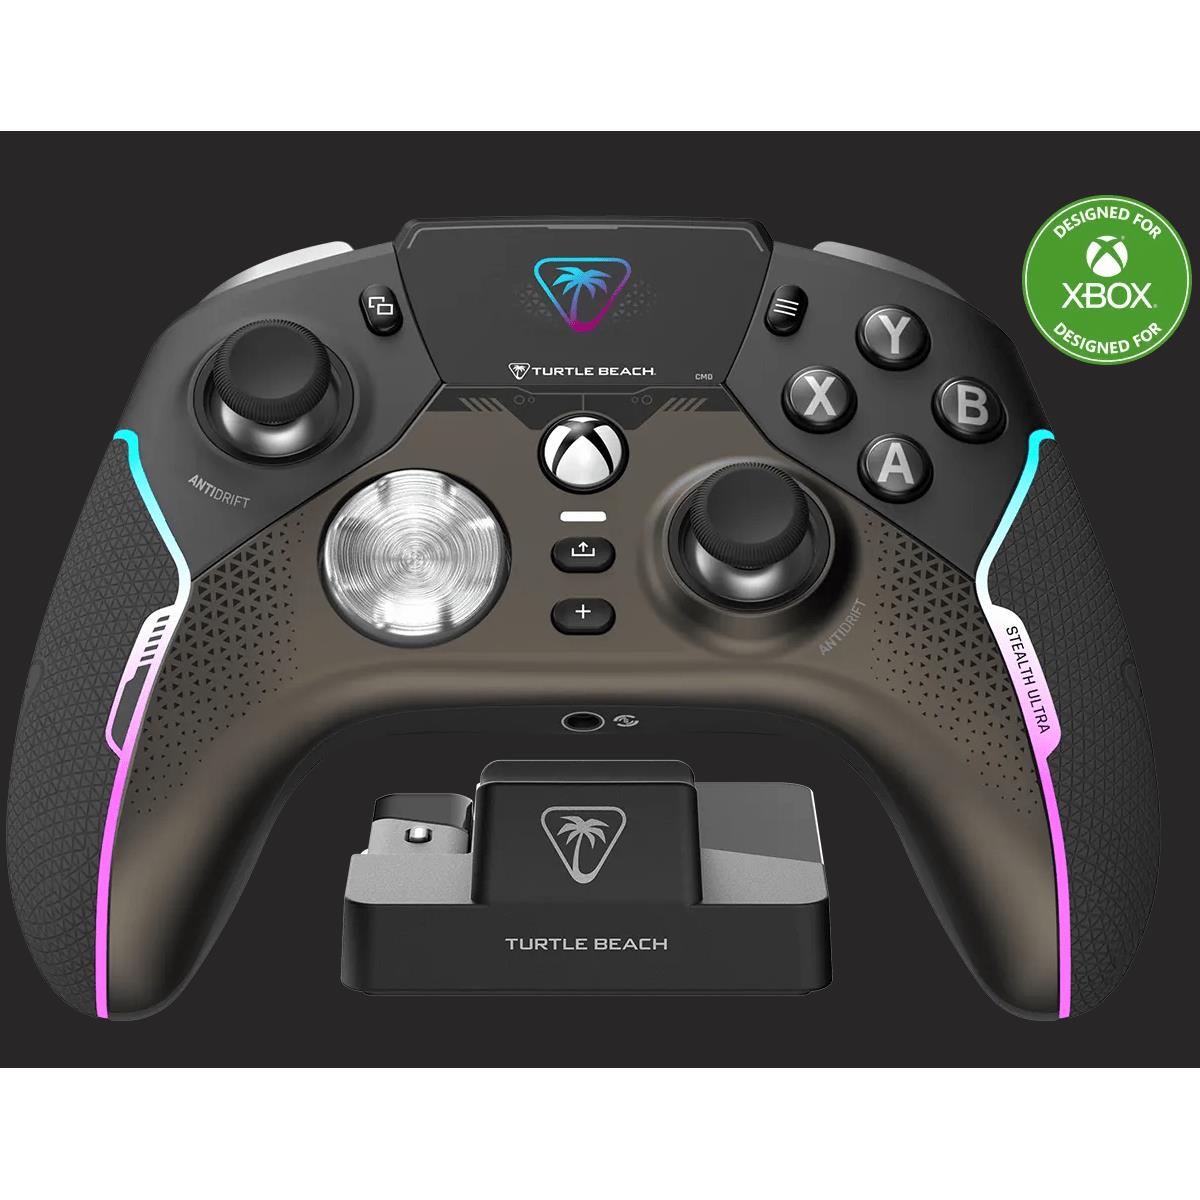 https://images.hothardware.com/contentimages/newsitem/63230/content/1x1_1200x1200_highres-turtle-beach-xbox-controller-news.jpg